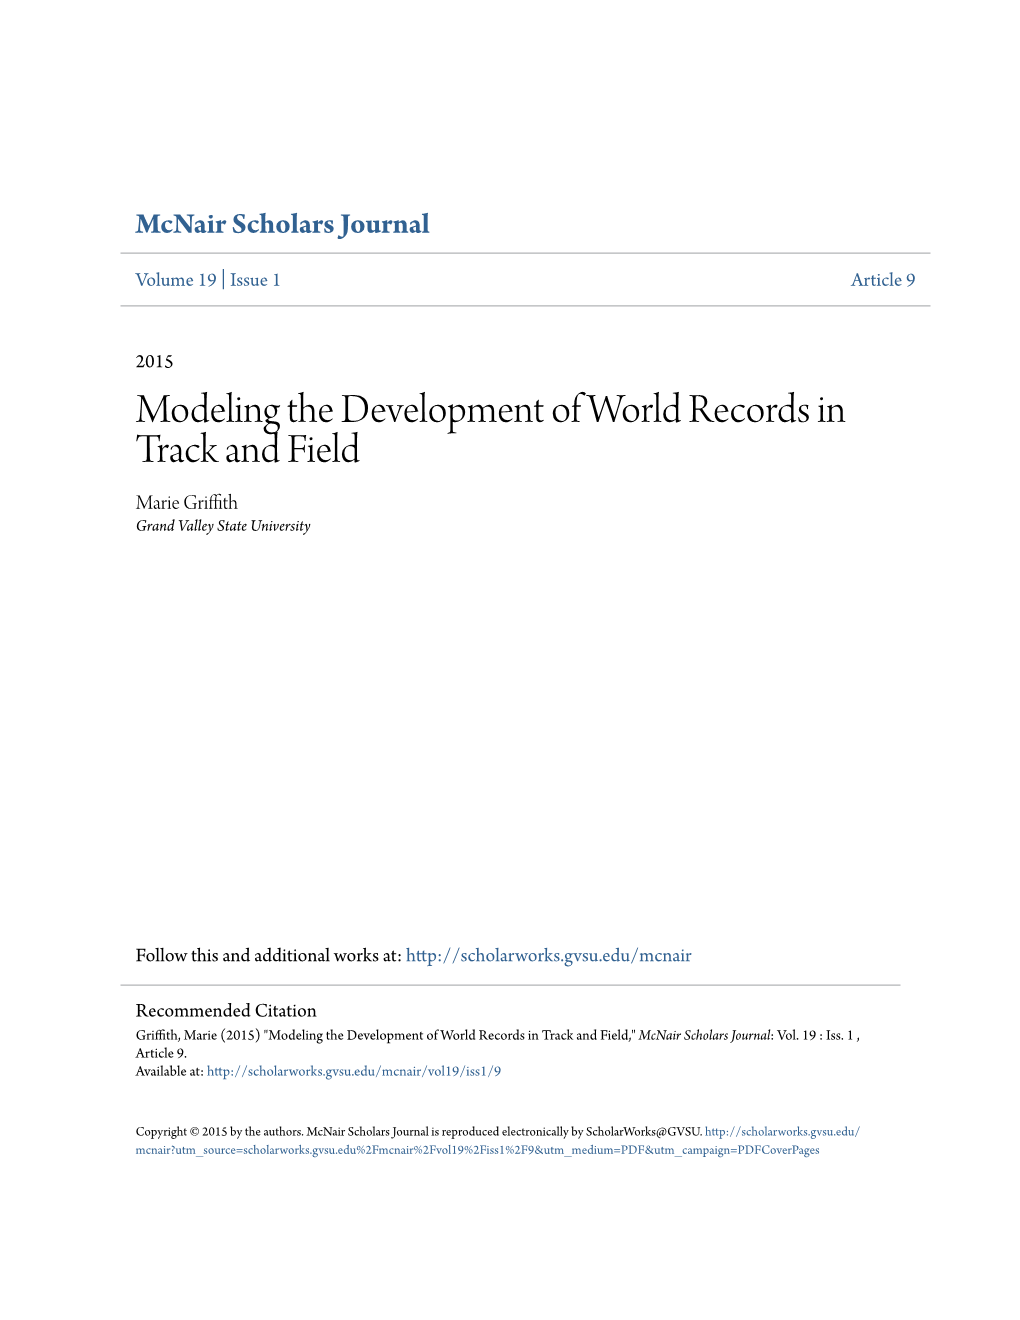 Modeling the Development of World Records in Track and Field Marie Griffith Grand Valley State University